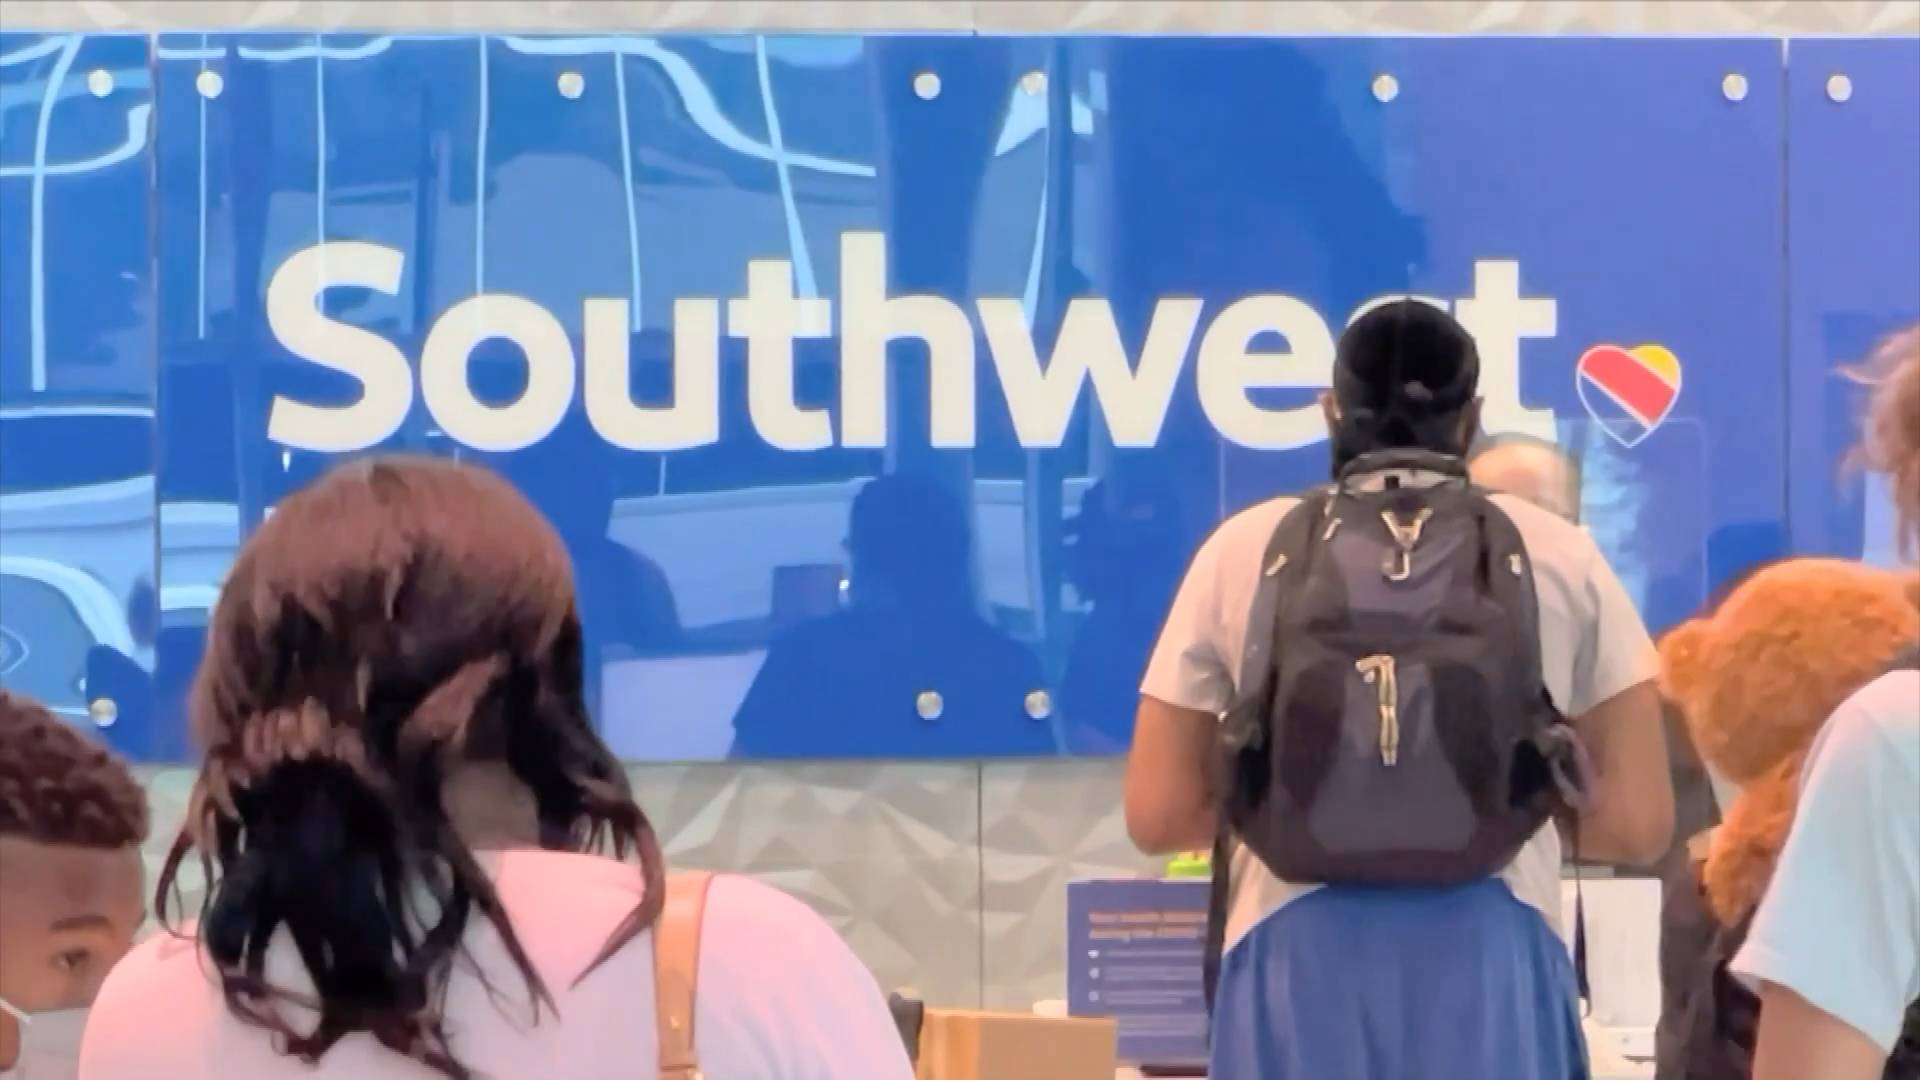 GLOBALink | U.S. Southwest Airlines CEO tests positive for COVID-19 after Senate hearing